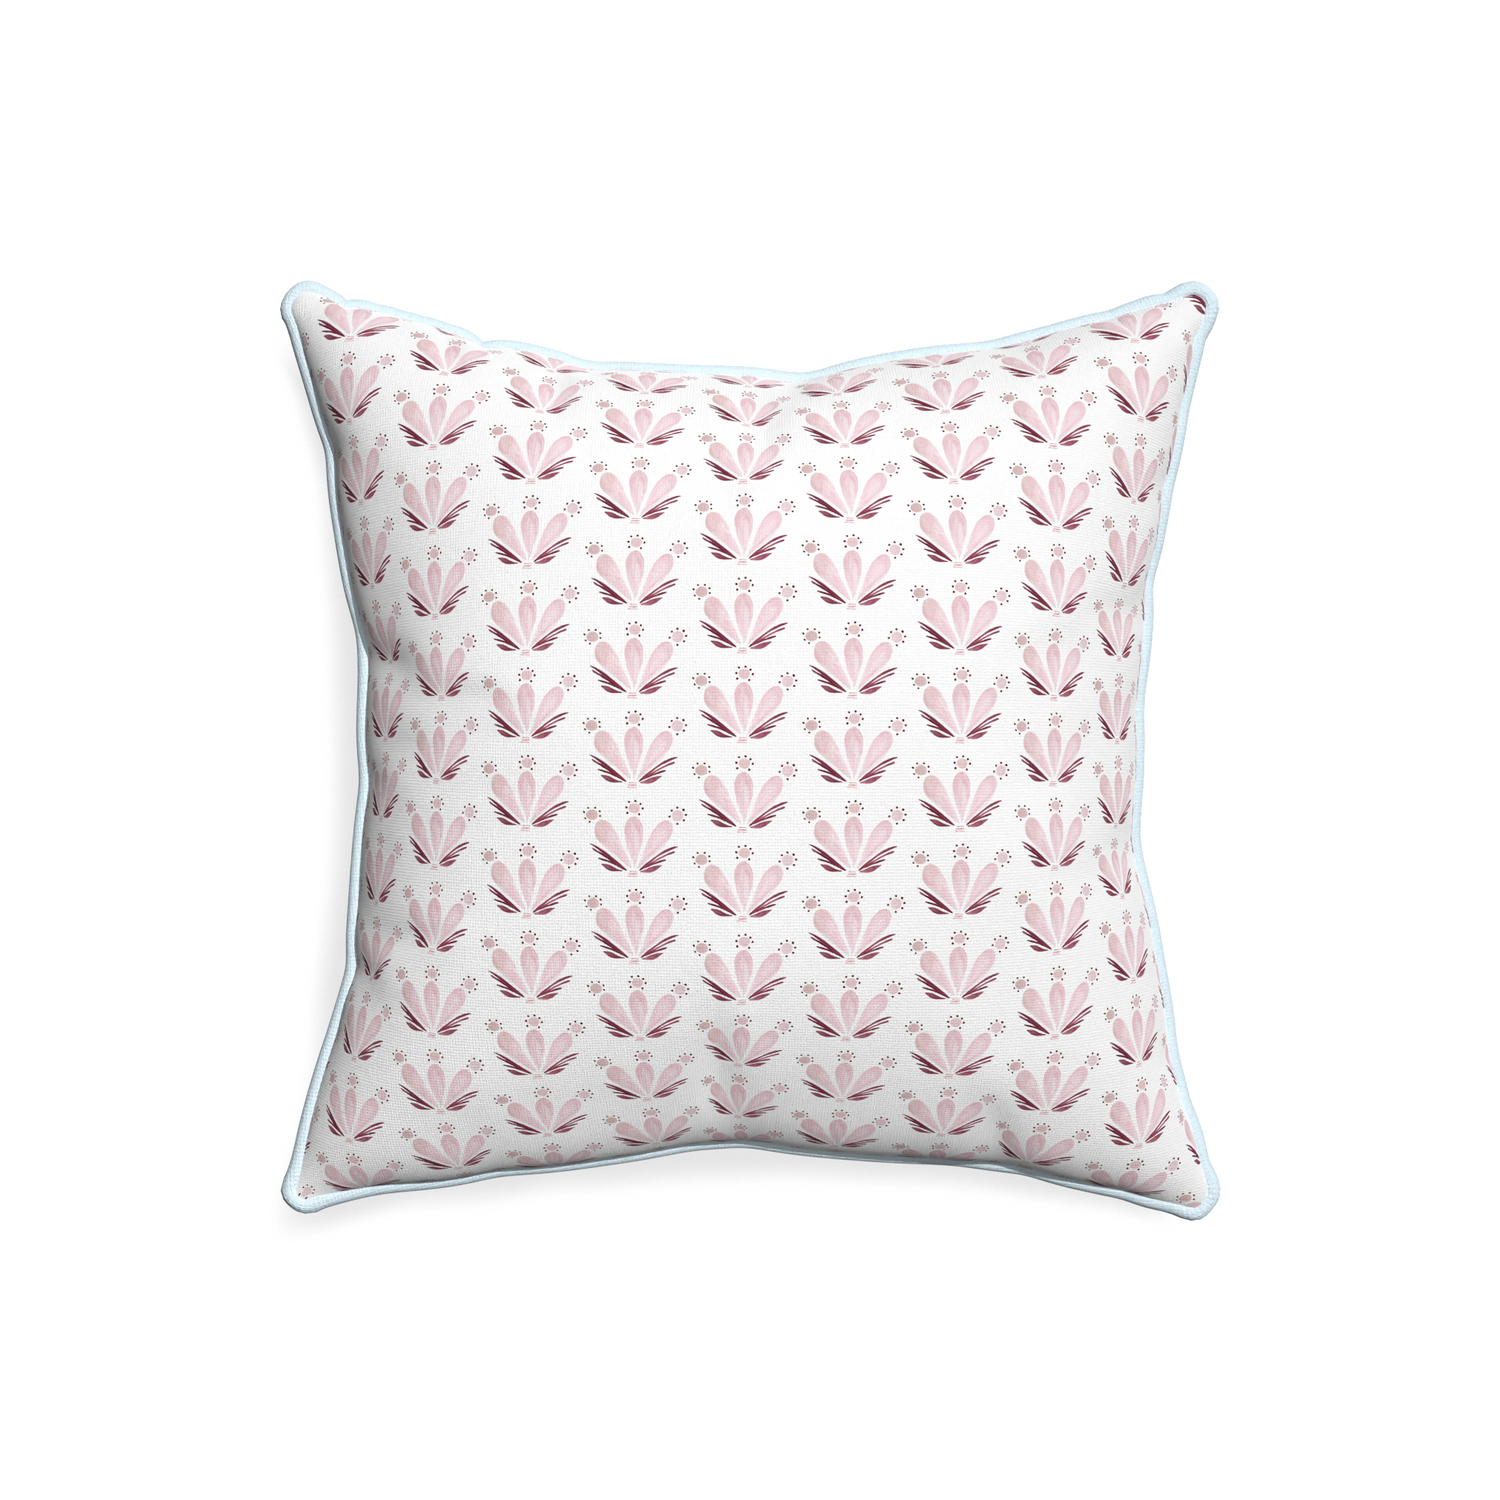 20-square serena pink custom pillow with powder piping on white background